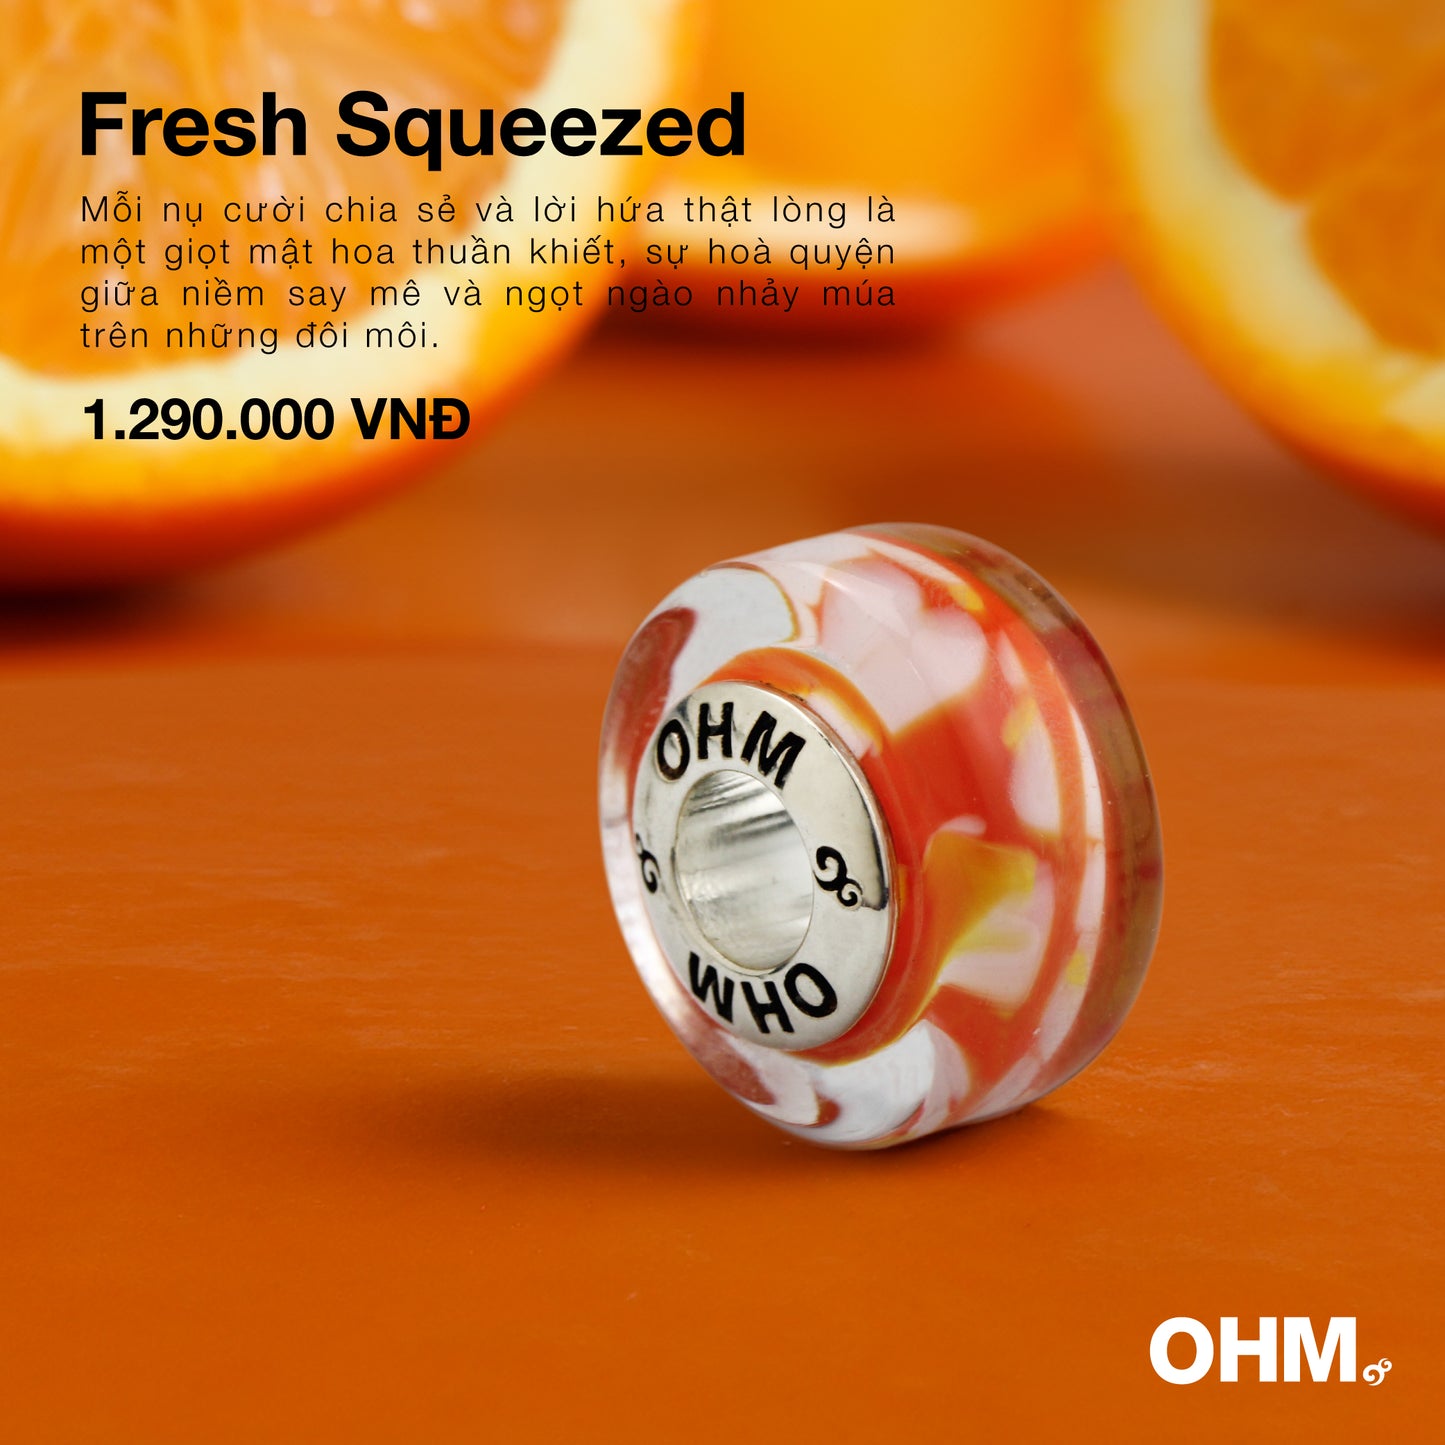 Fresh Squeezed